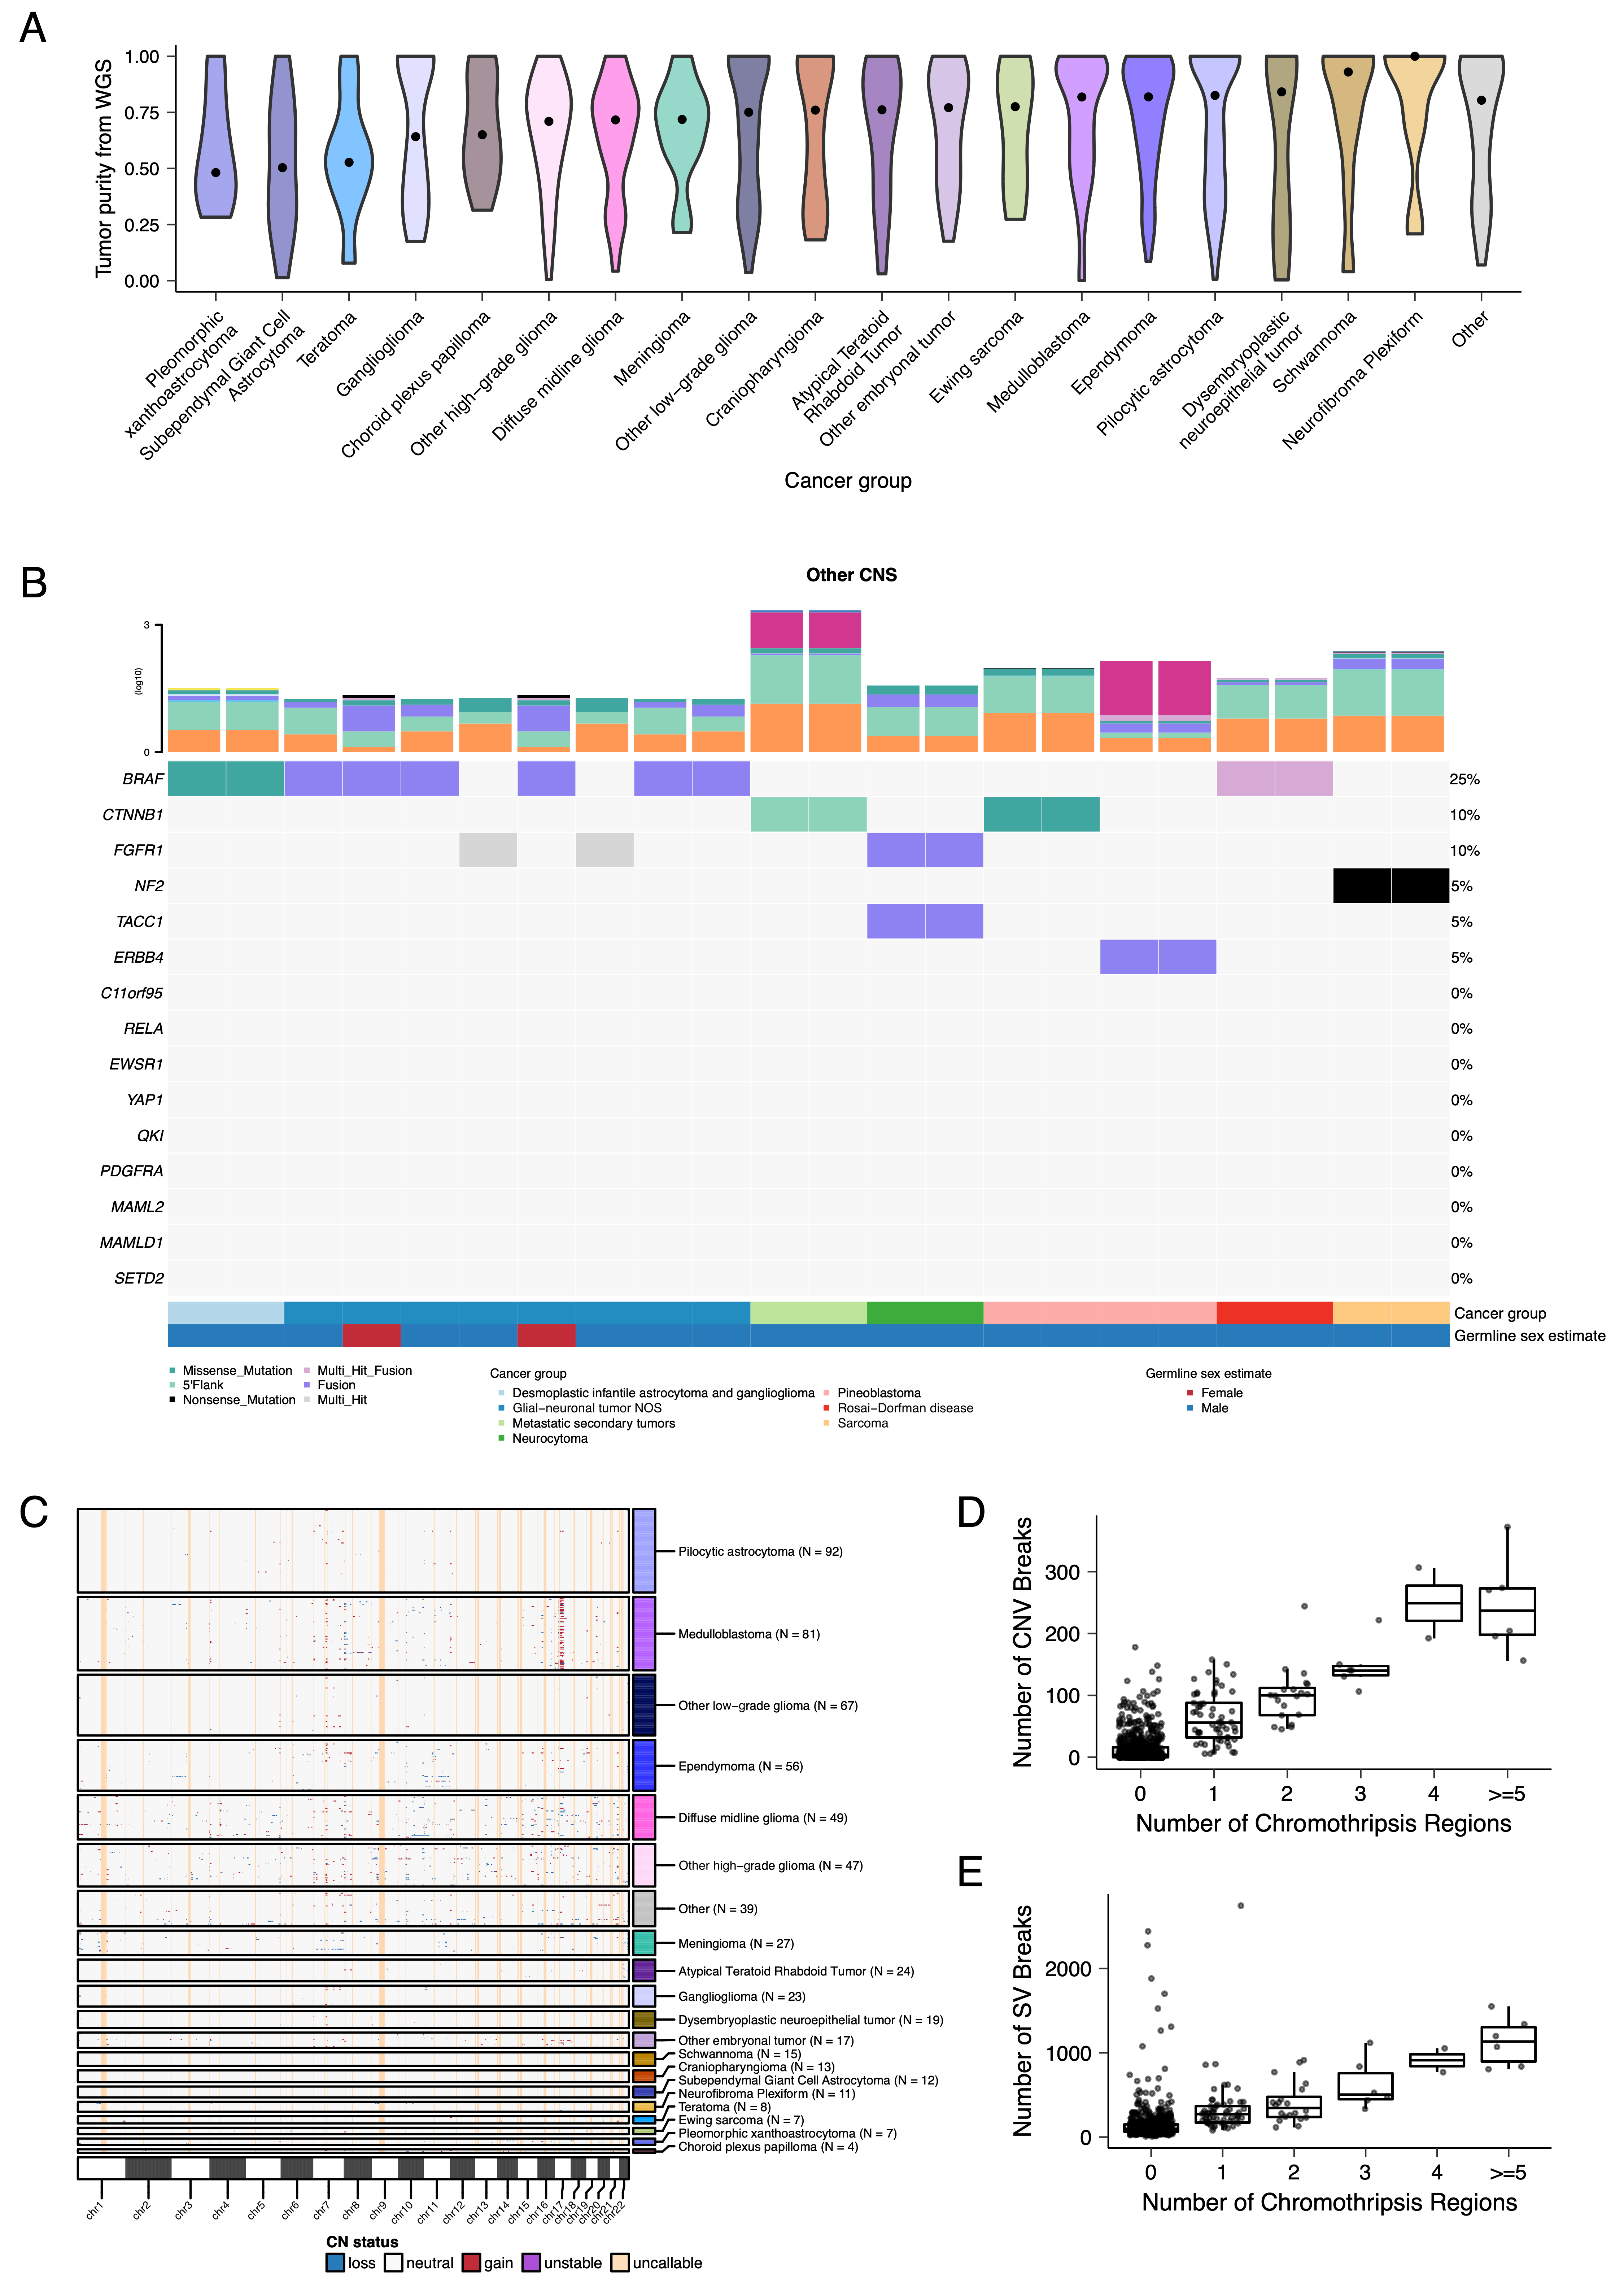 Figure S3: Genomic instability of pediatric brain tumors, Related to Figures 2 and 3. (A) Violin plots of tumor purity by cancer group. Dots represent the group median. (B) Oncoprint of canonical somatic gene mutations, CNVs, fusions, and TMB (top bar plot) for the top mutated genes across rare CNS tumors: desmoplastic infantile astrocytoma and ganglioglioma (N = 2), germinoma (N = 4), glial-neuronal NOS (N = 8), metastatic secondary tumors (N = 2), neurocytoma (N = 2), pineoblastoma (N = 4), Rosai-Dorfman disease (N = 2), and sarcomas (N = 4). Patient sex (Germline sex estimate) and tumor histology (Cancer Group) are displayed as annotations at the bottom of each plot. Multiple CNVs are denoted as a complex event. N denotes the number of unique tumors with one tumor per patient used. (C) Genome-wide plot of CNV alterations by broad histology. Each row represents one sample. Box and whisker plots of number of CNV breaks (D) or SV breaks (E) by number of chromothripsis regions. Box plot represents 5% (lower whisker), 25% (lower box), 50% (median), 75% (upper box), and 95% (upper whisker) quantiles.